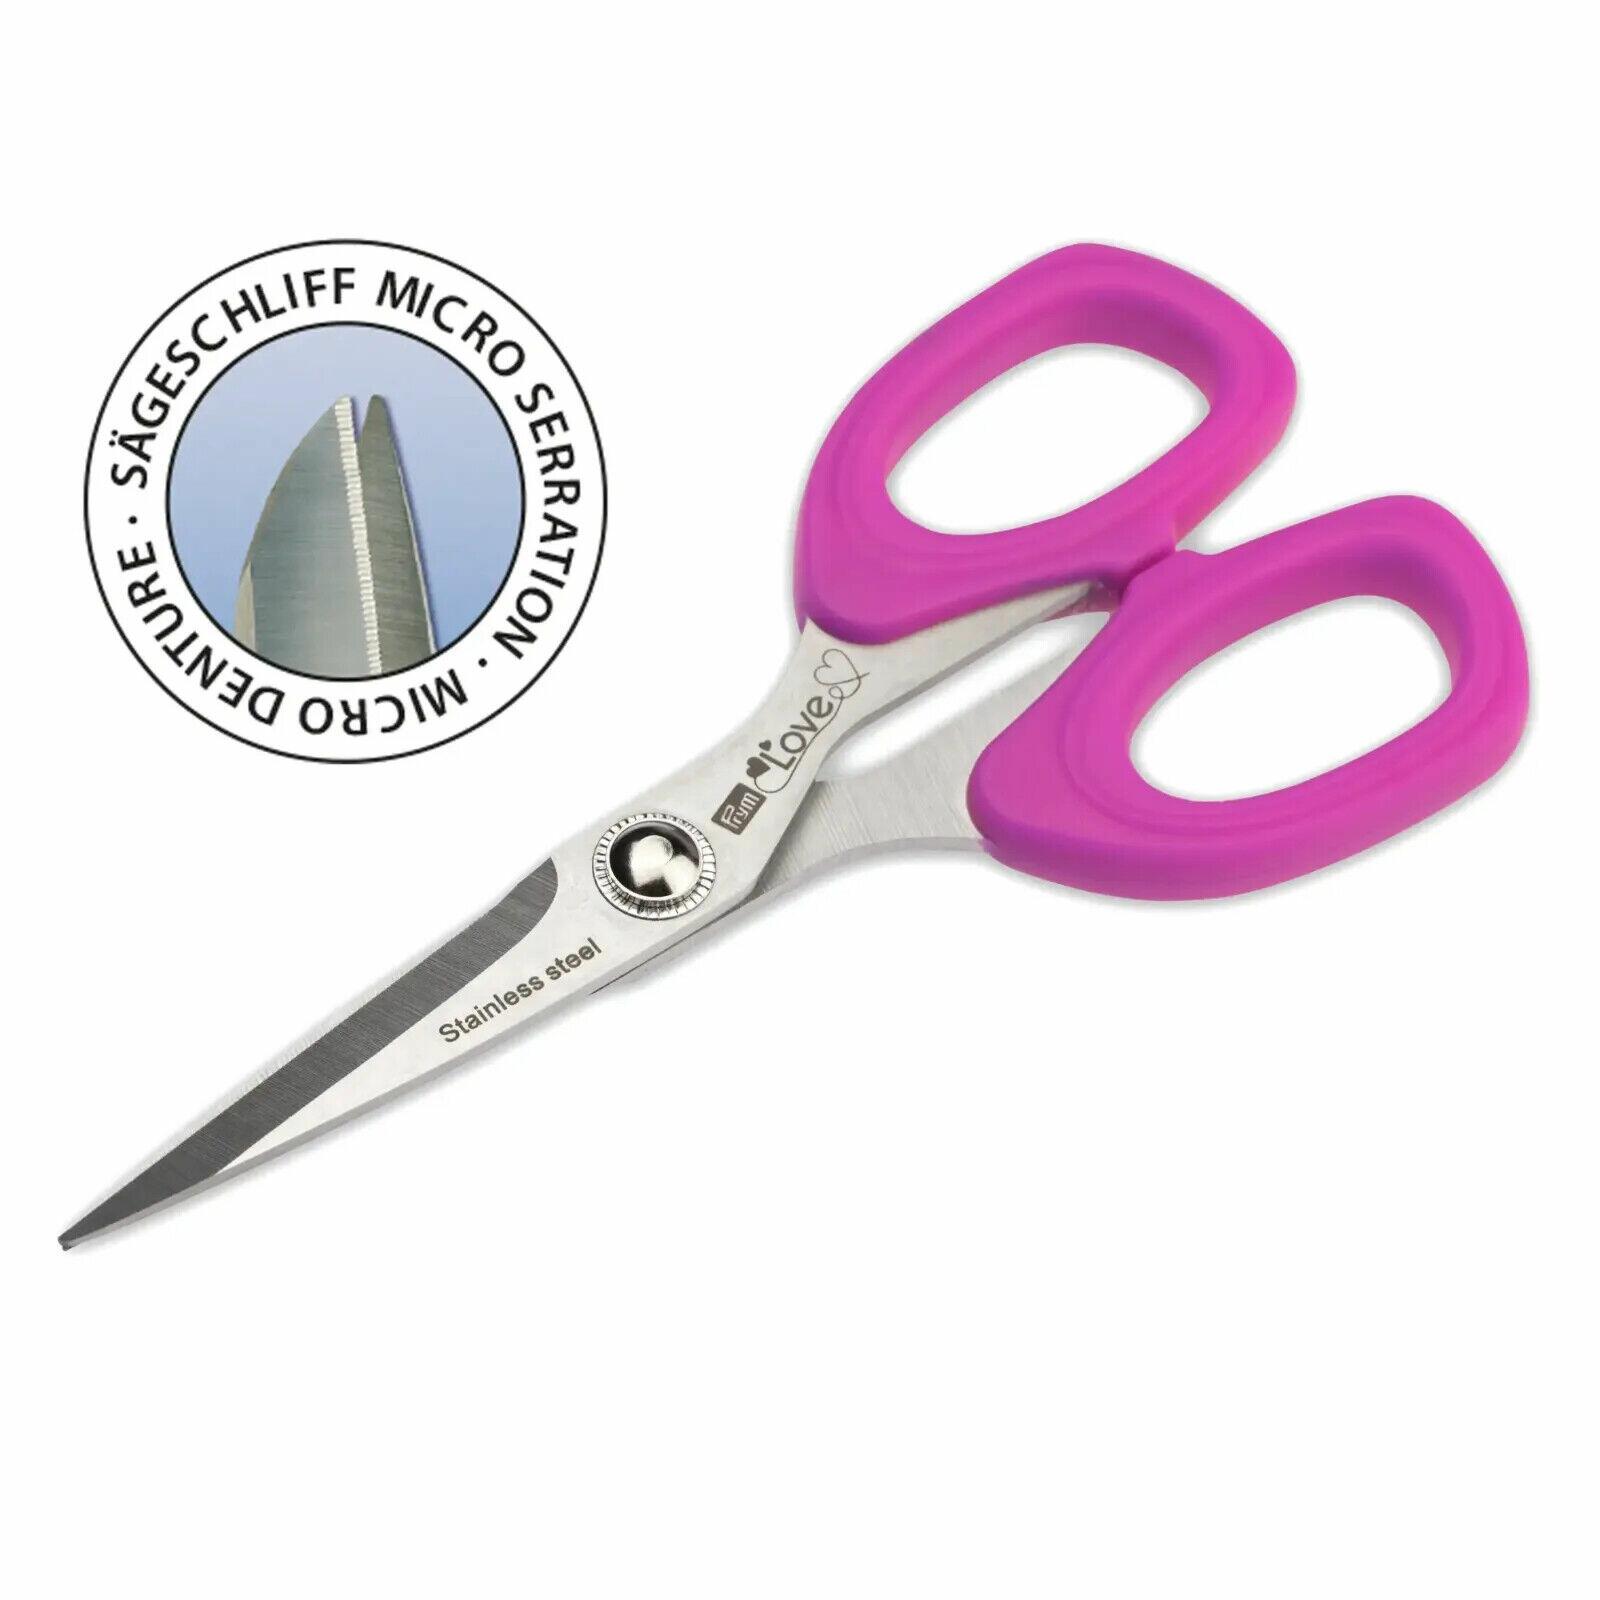 Needlework Detail Scissors | Westcott | Fine Point | Pink | 10cm - 4  Stainless Steel Blades | Small Sewing, Embroidery, Knitting Scissors